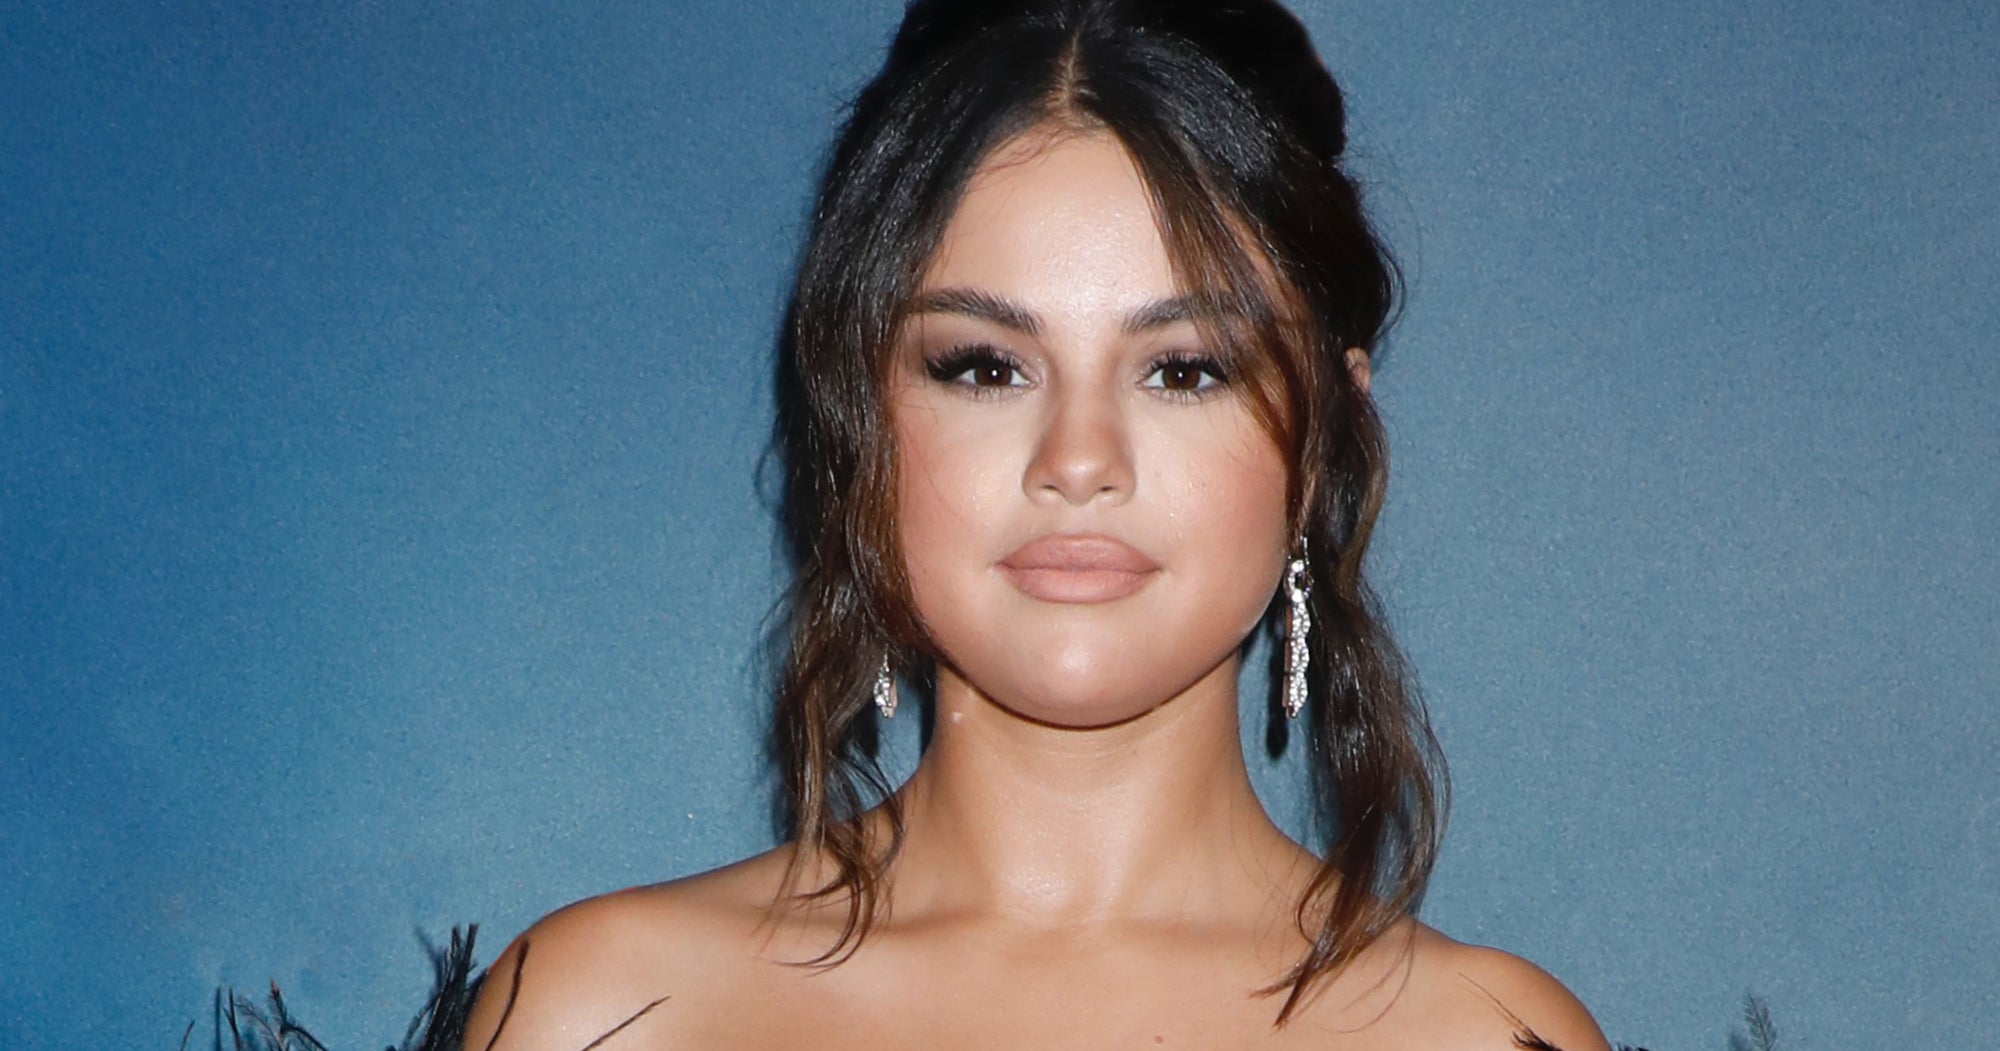 After Growing Up Disney, Selena Gomez Was Afraid To Expose Her Real Self - Refinery29